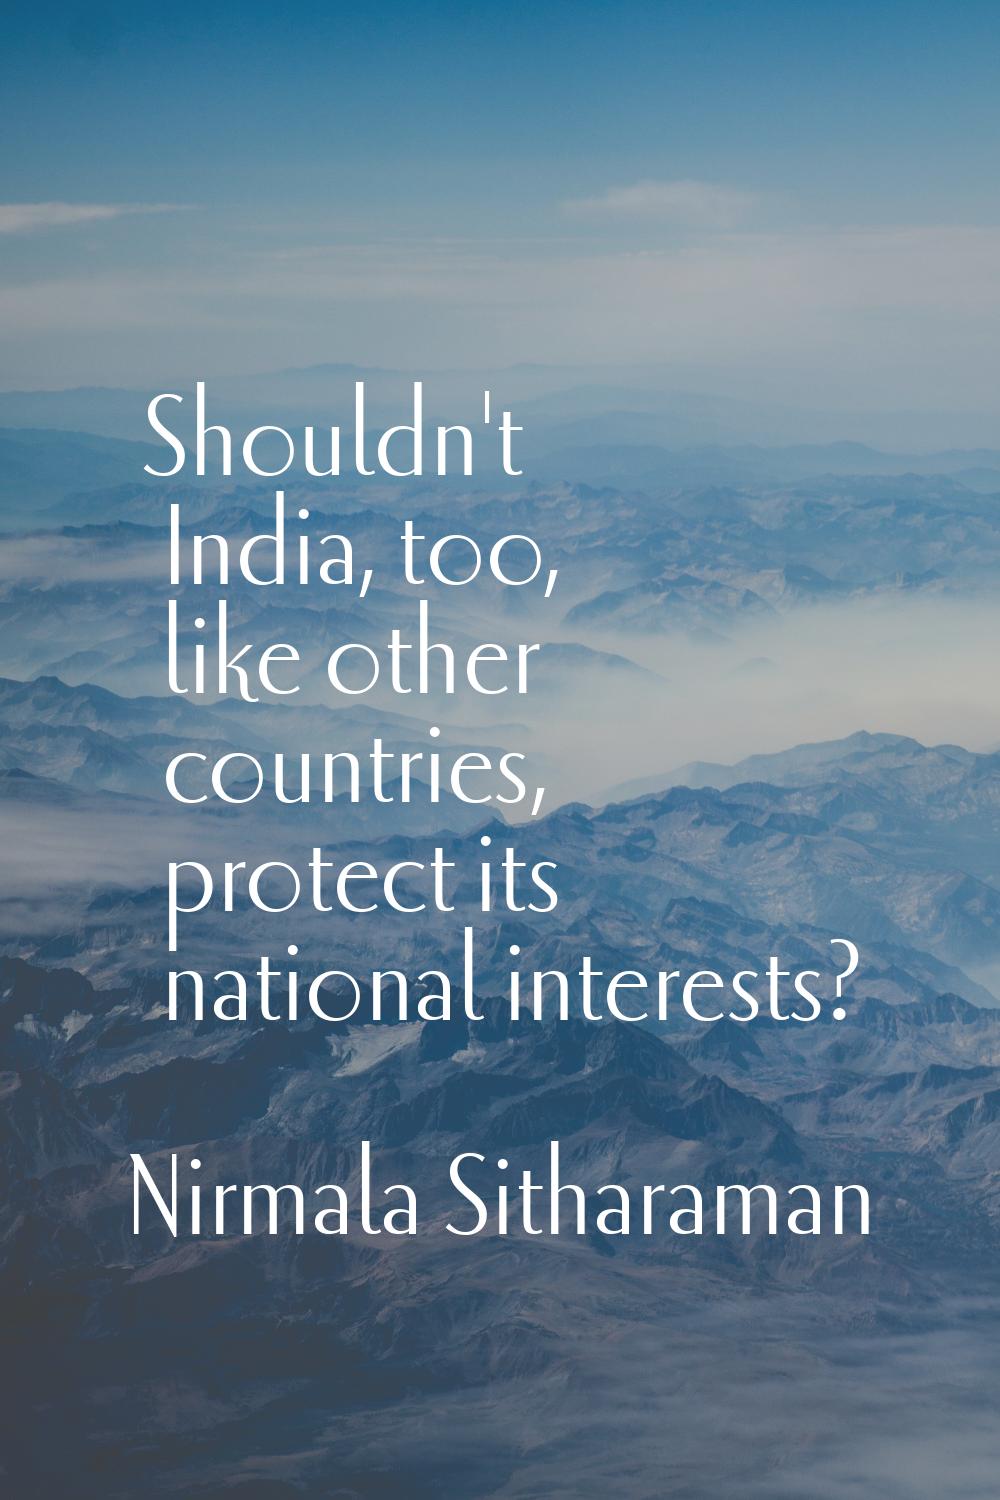 Shouldn't India, too, like other countries, protect its national interests?